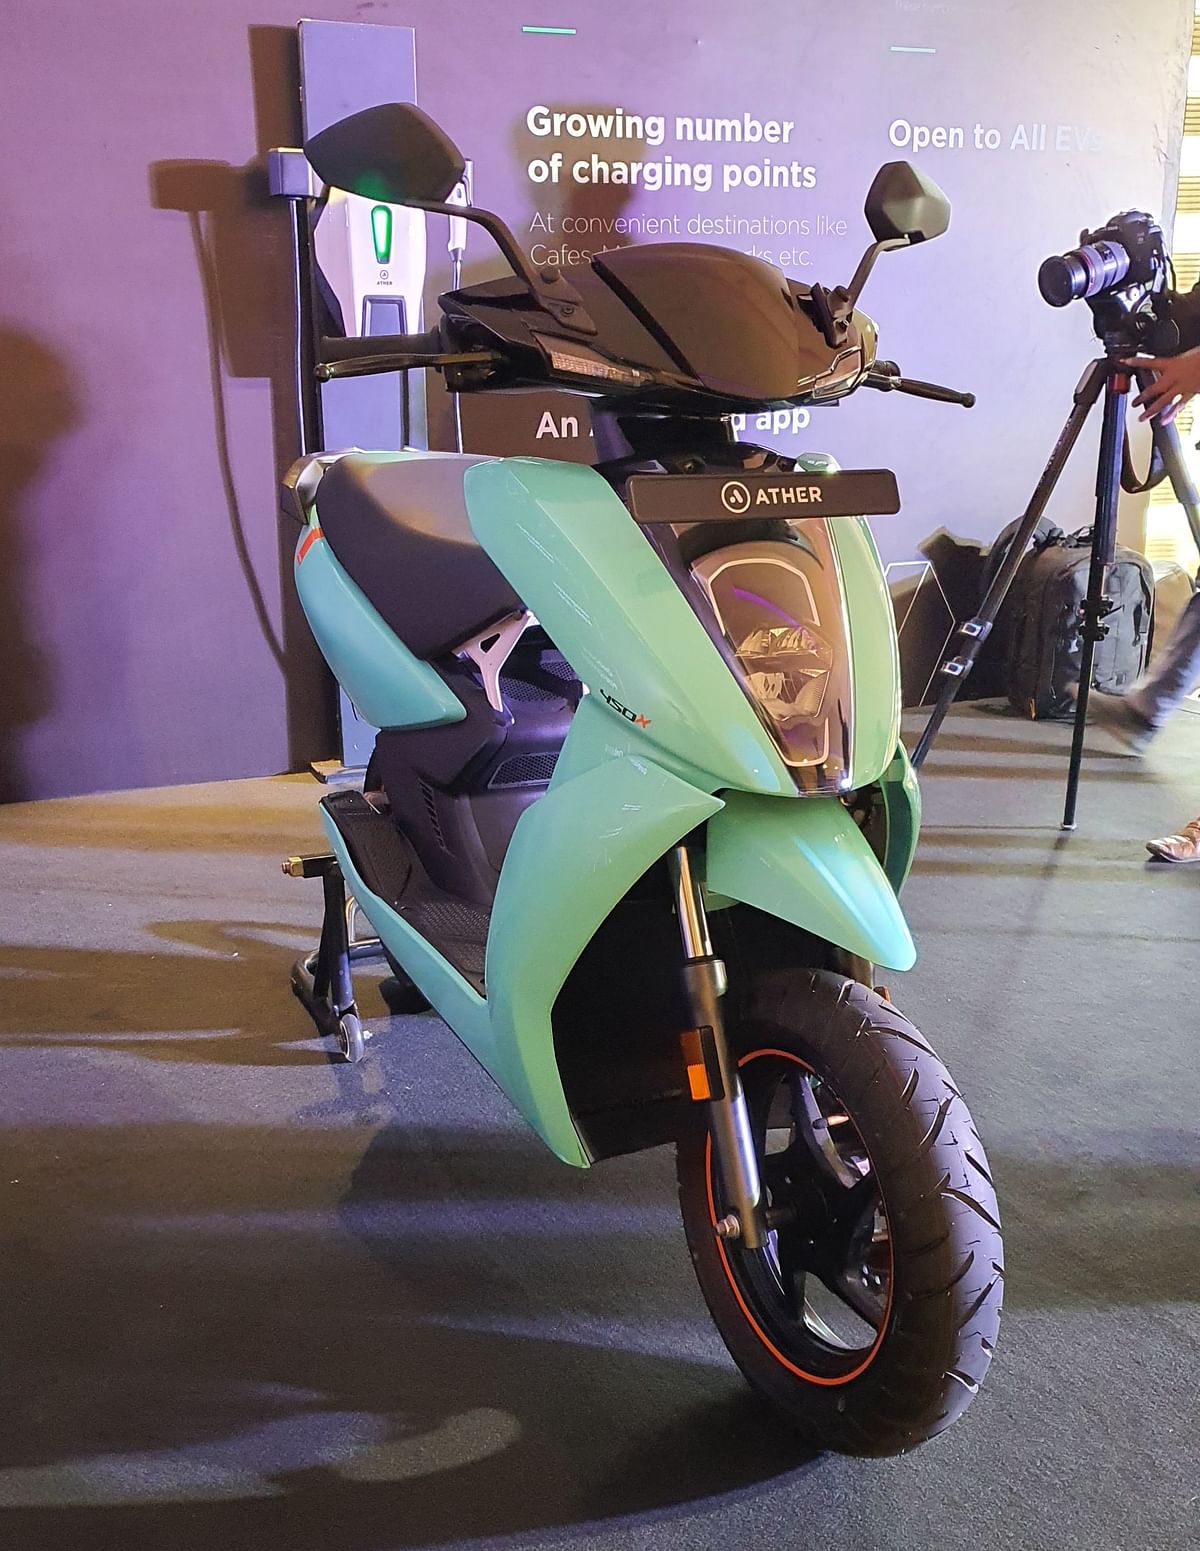 The Ather 450x is an upgrade to the existing Ather 450 model which was earlier available in Bengaluru & Chennai.